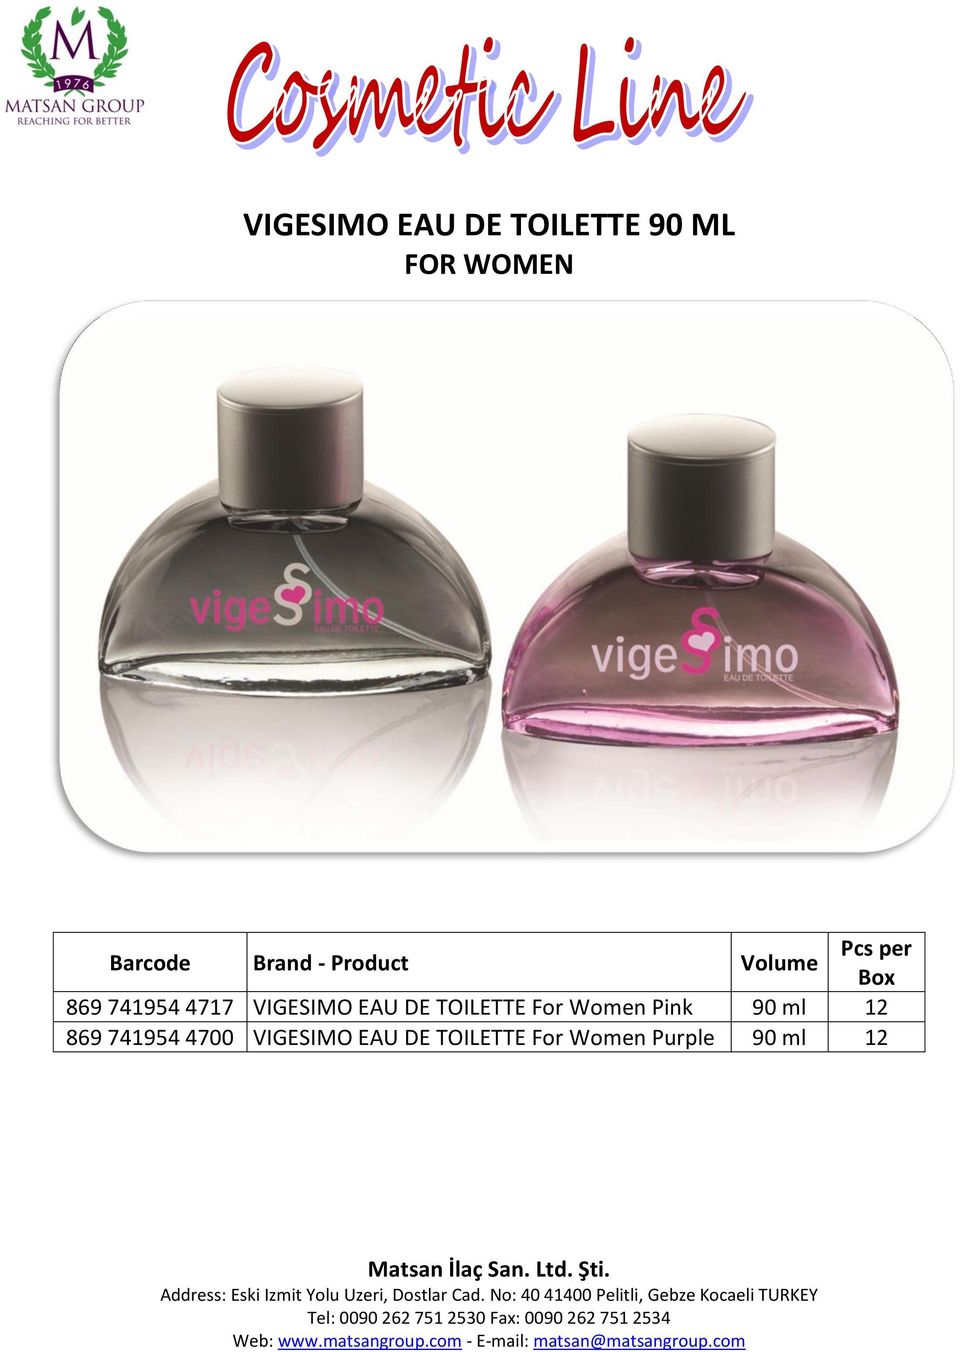 For Women Pink 90 ml 12 869 741954 4700